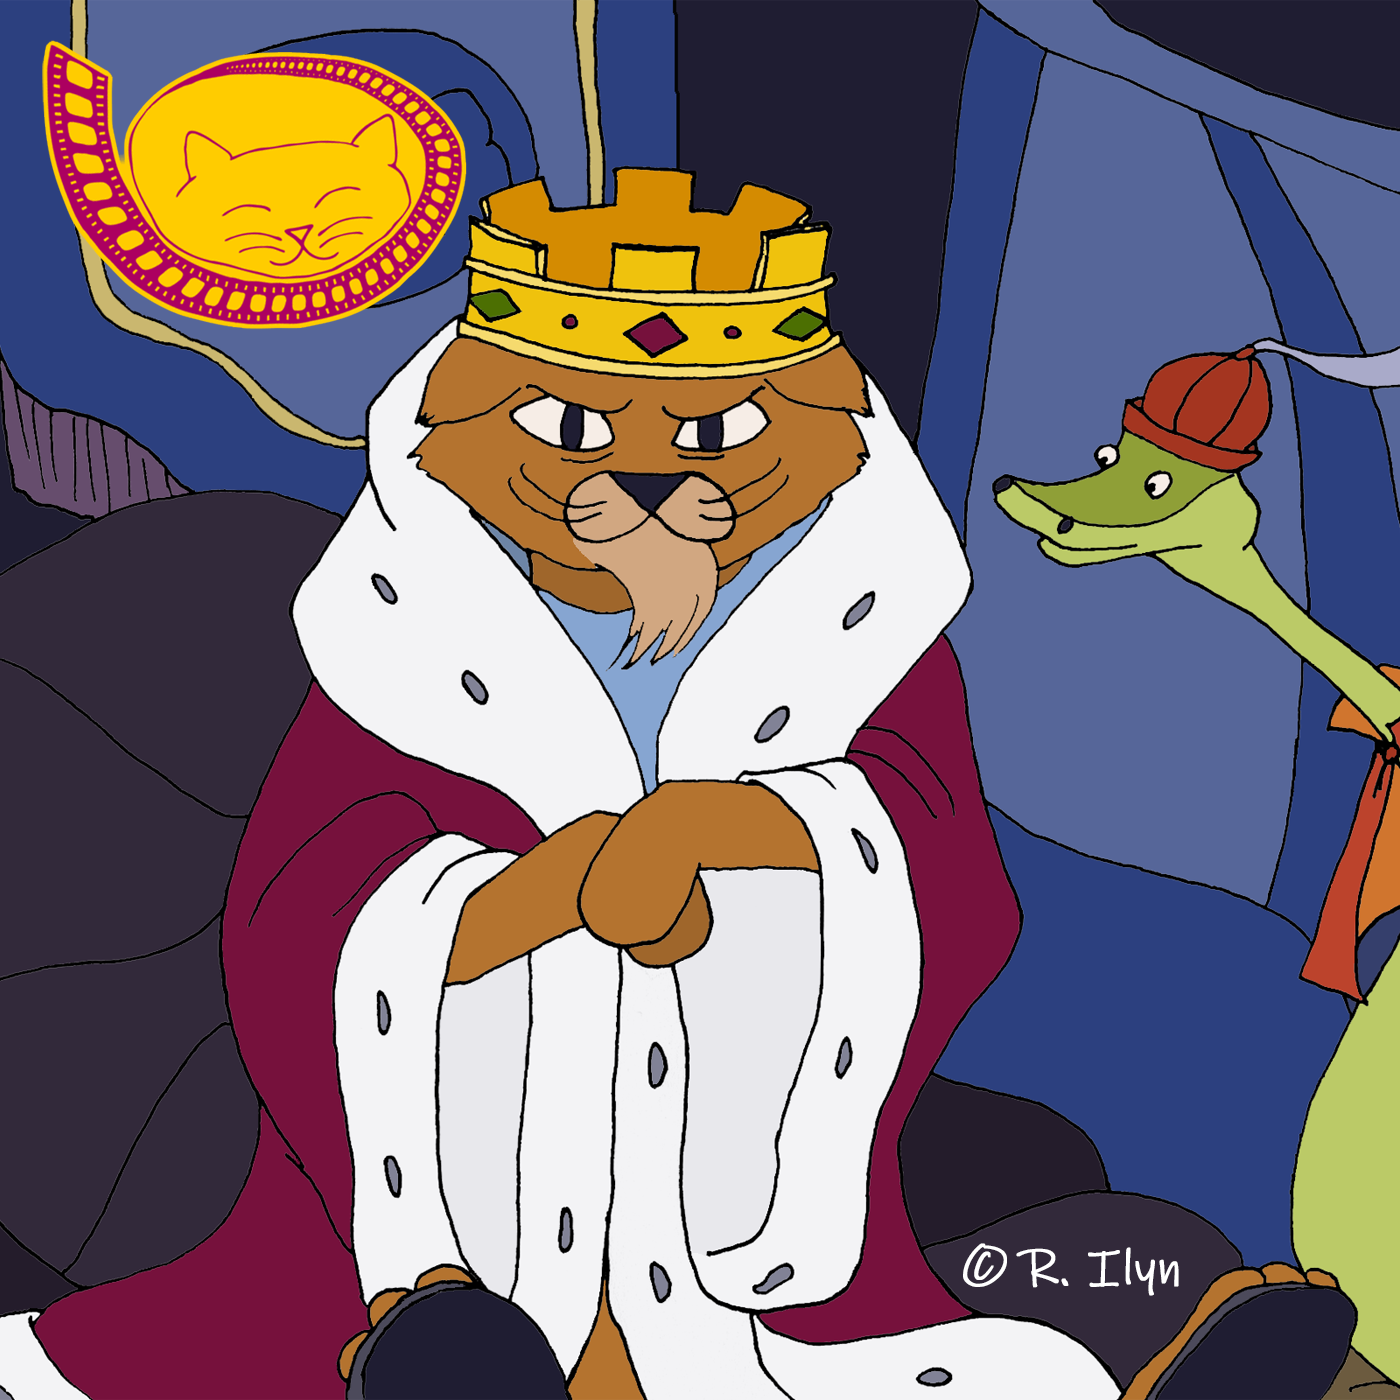 Illustration of lion Prince John and snake Sir Hiss from Disney's Robin Hood